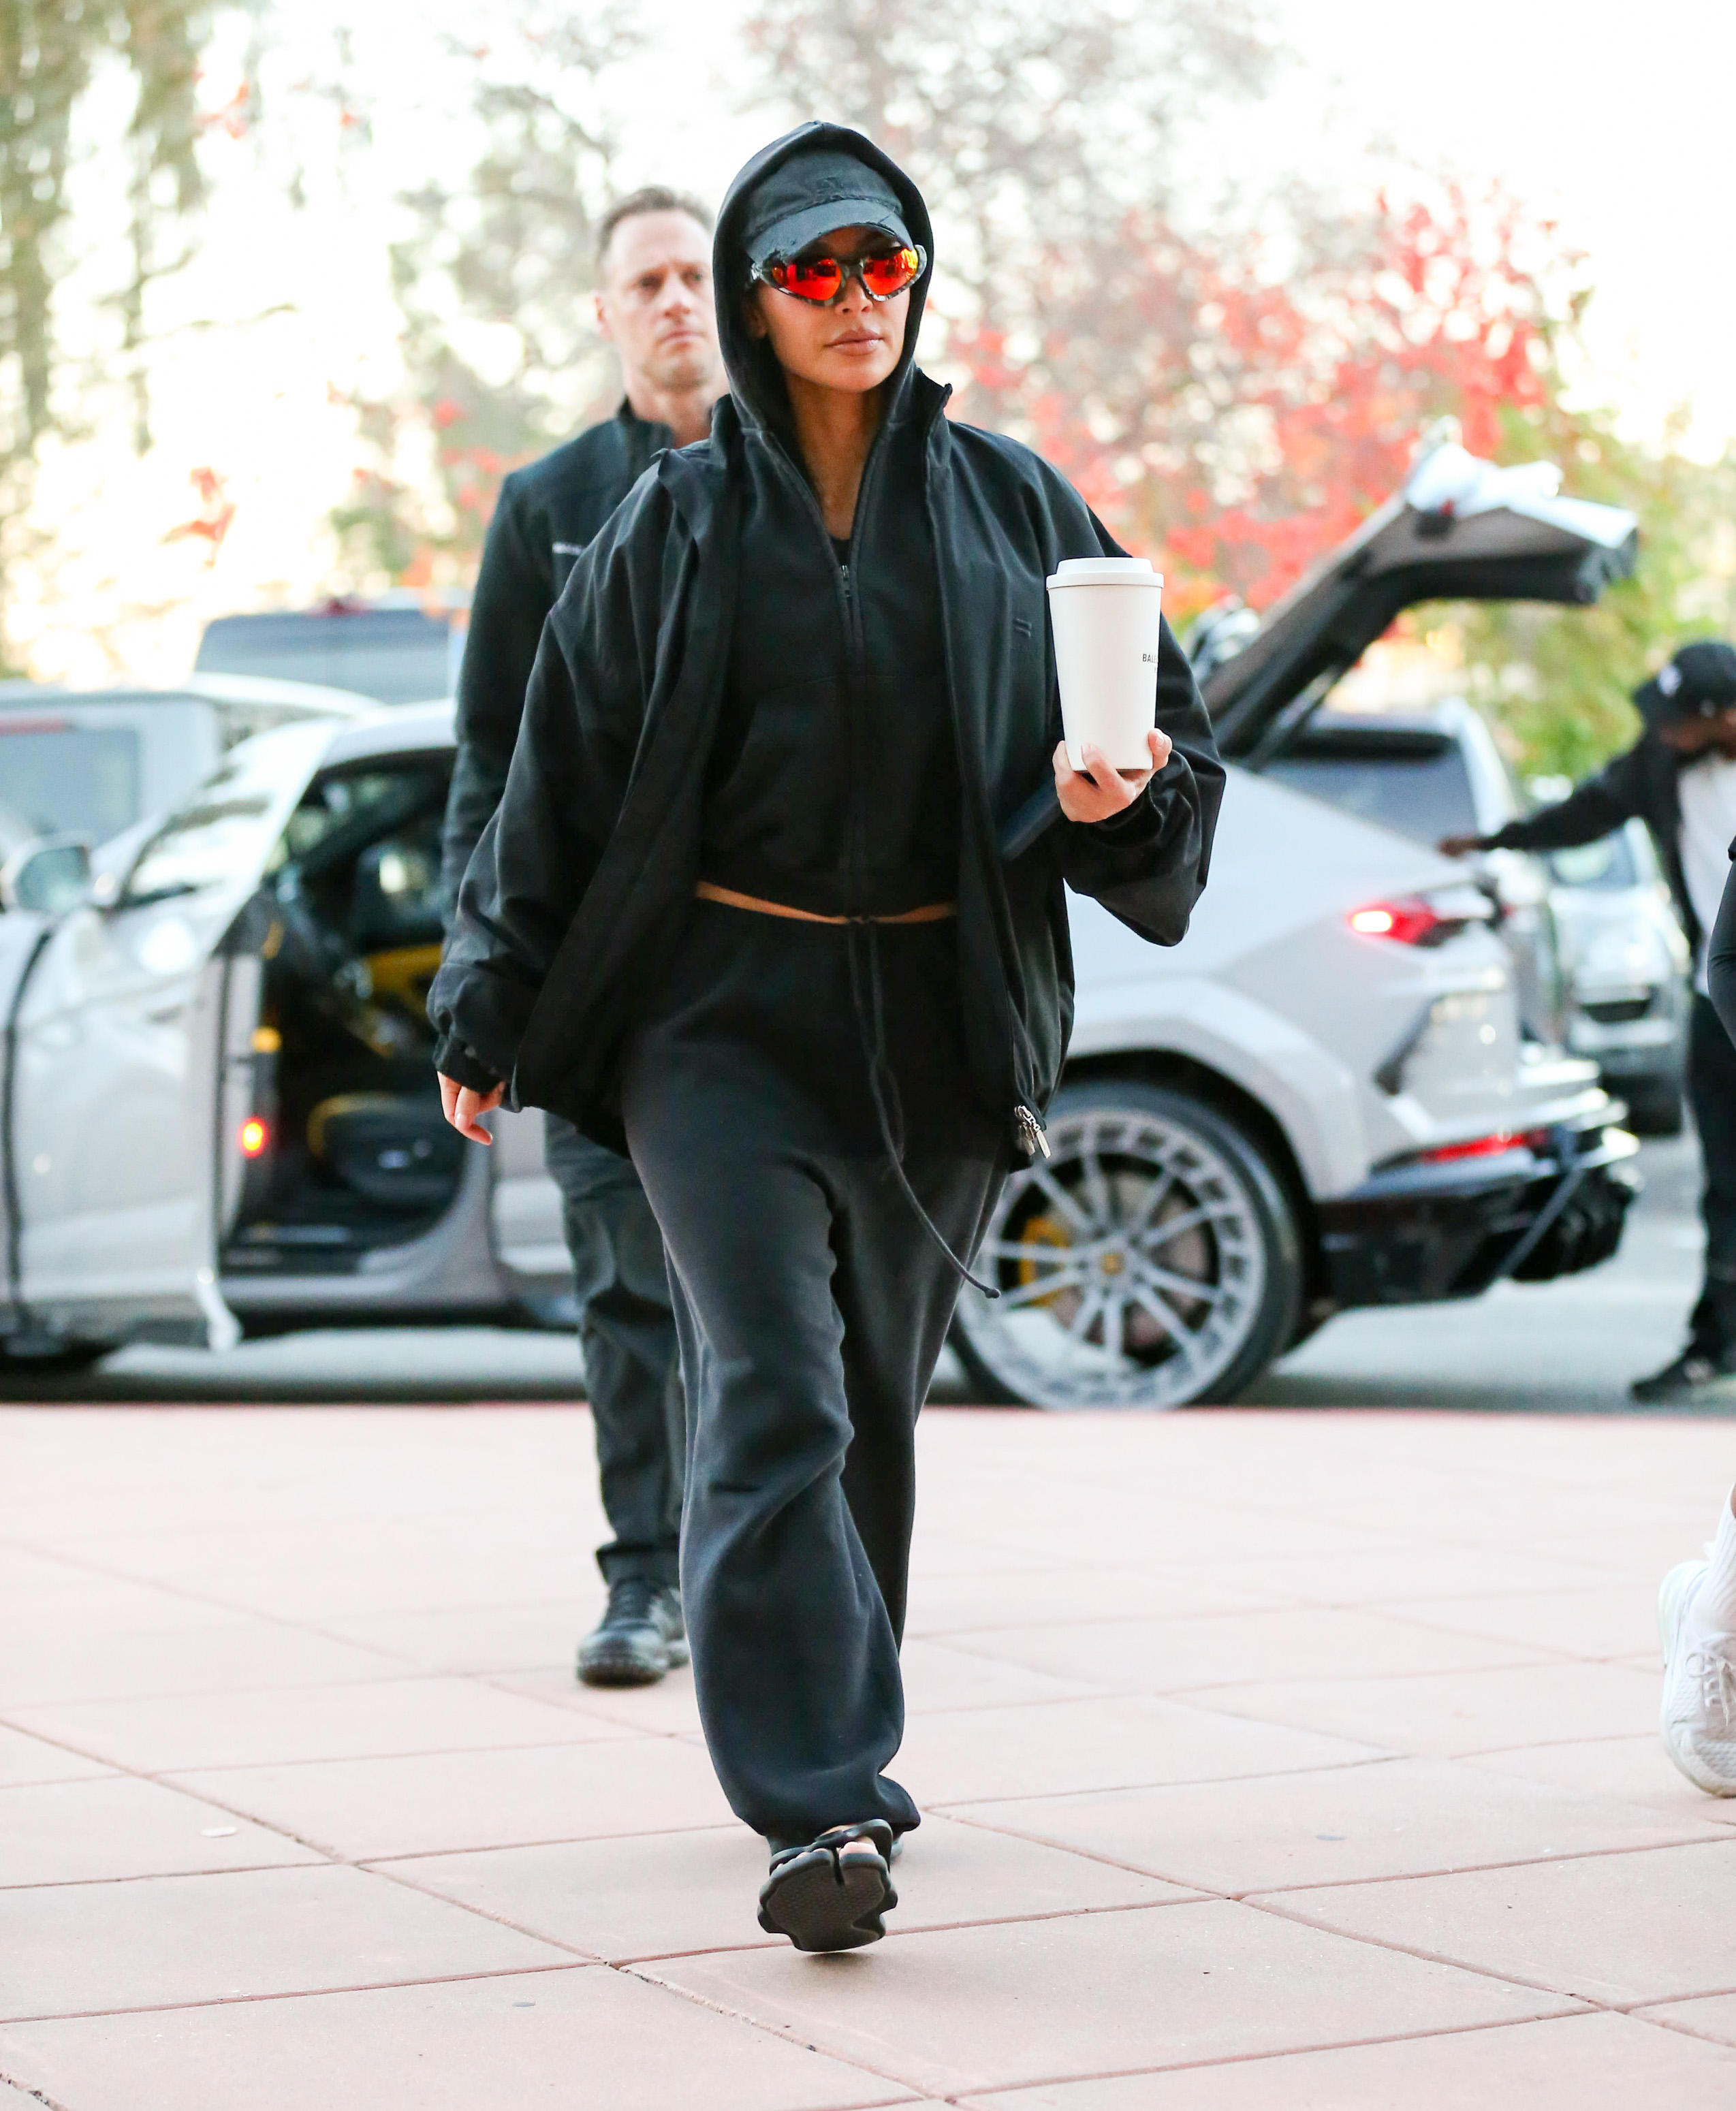 Kim is spotted many times while running errands and attending events, however, she rarely flips off cameras.